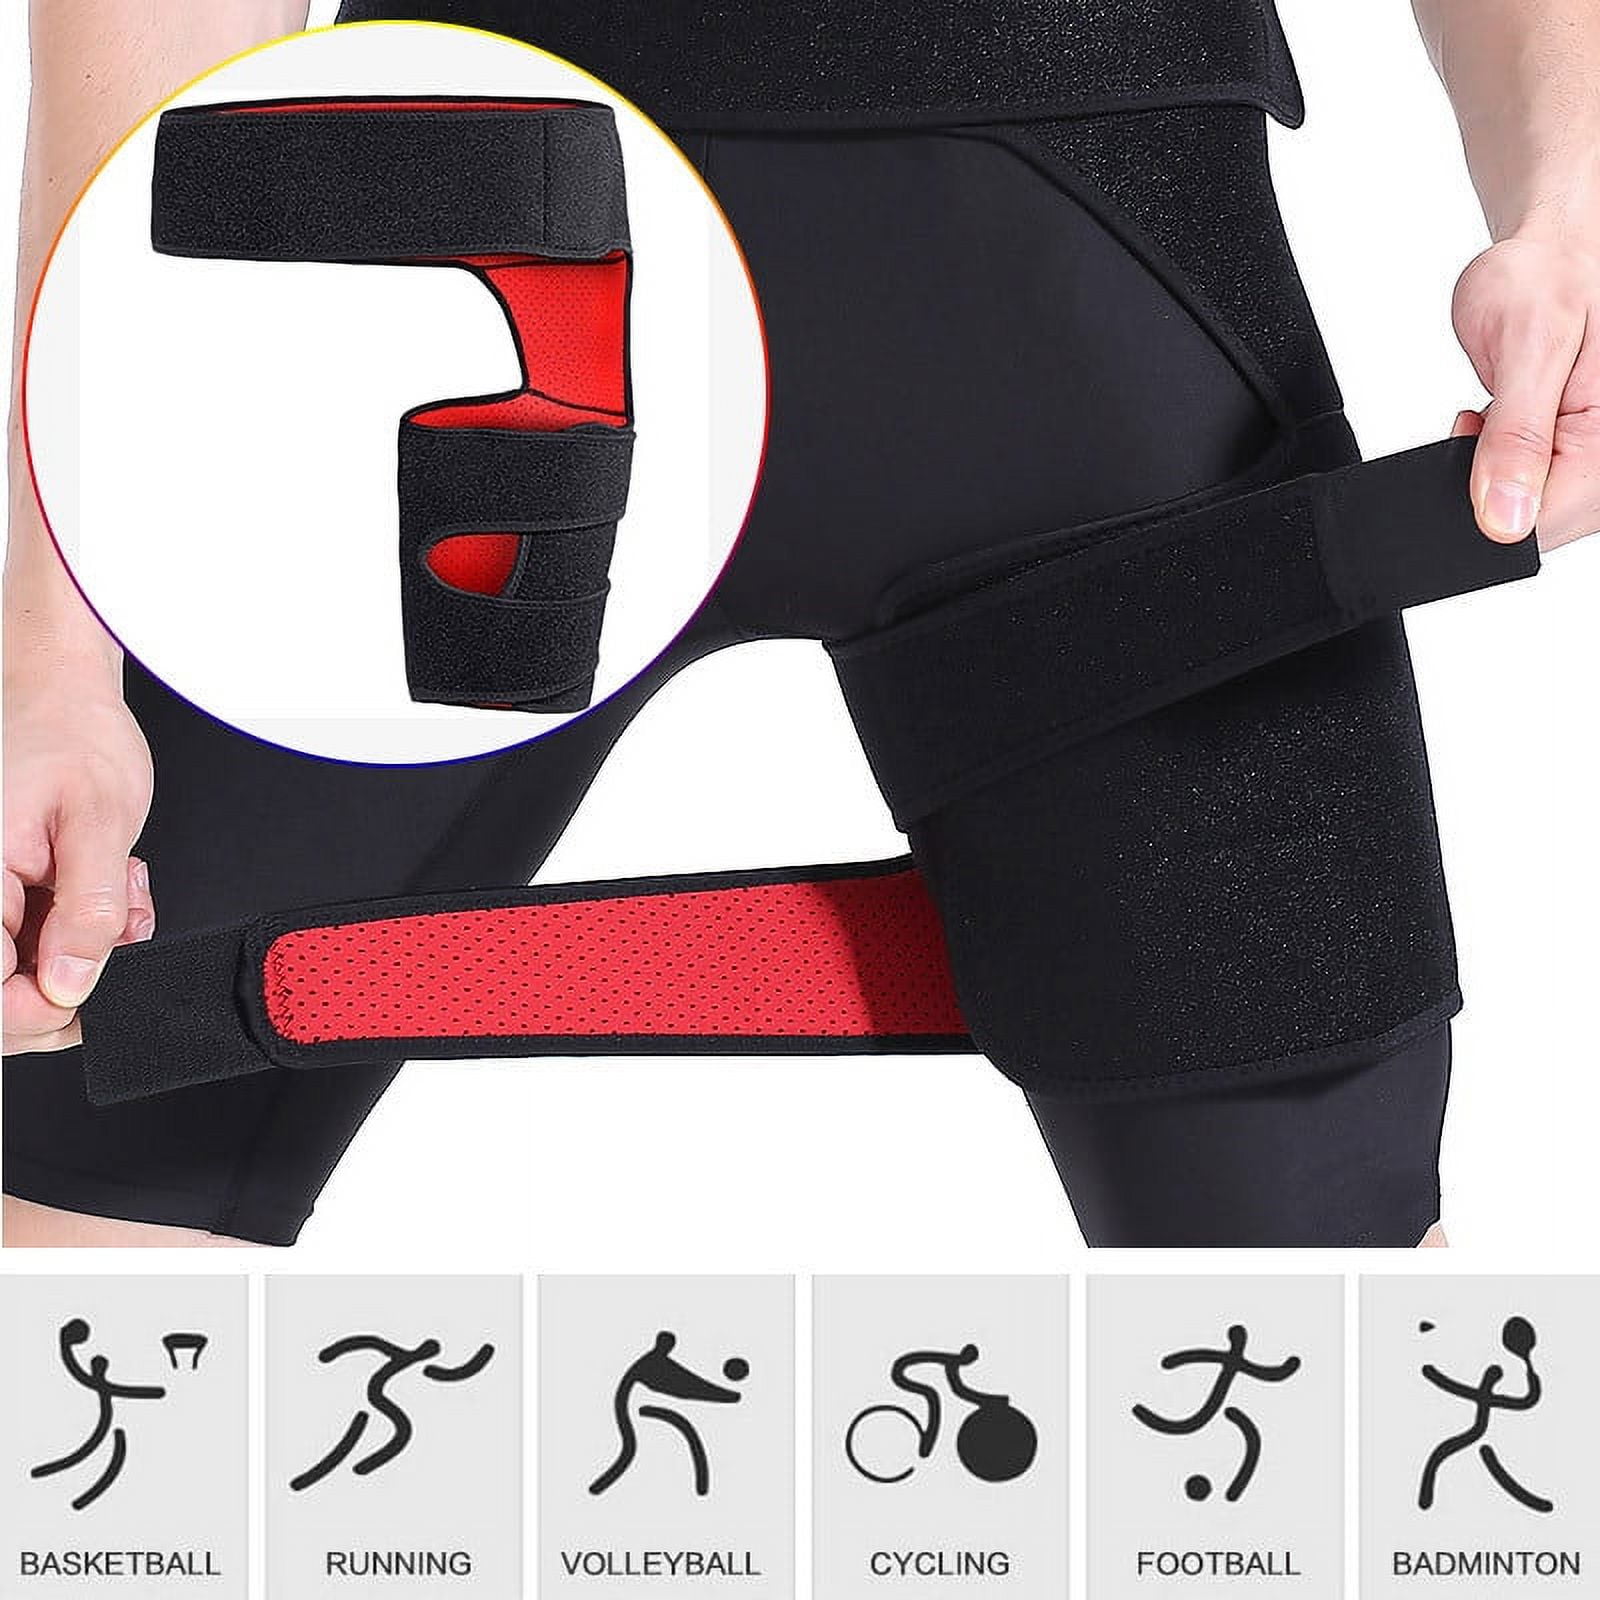 Hip Brace for Sciatica Pain Relief - Compression Wrap for Sciatic Nerve,  Hamstring Pull, Hip Fleхоr Strain, Groin Injury, Pulled Thigh - SI Belt 